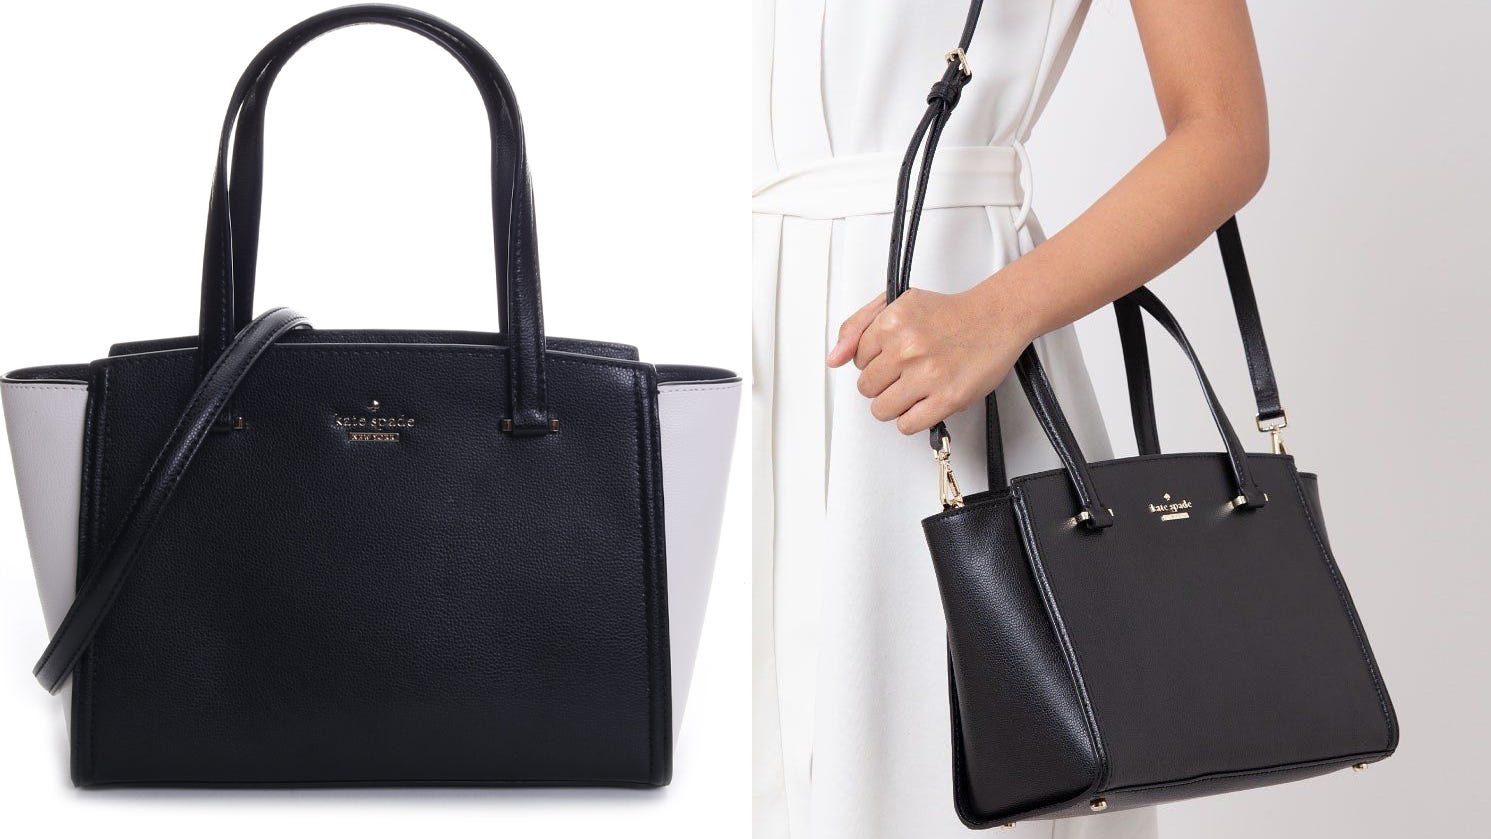 Kate Spade tote bag sale: Save on this 